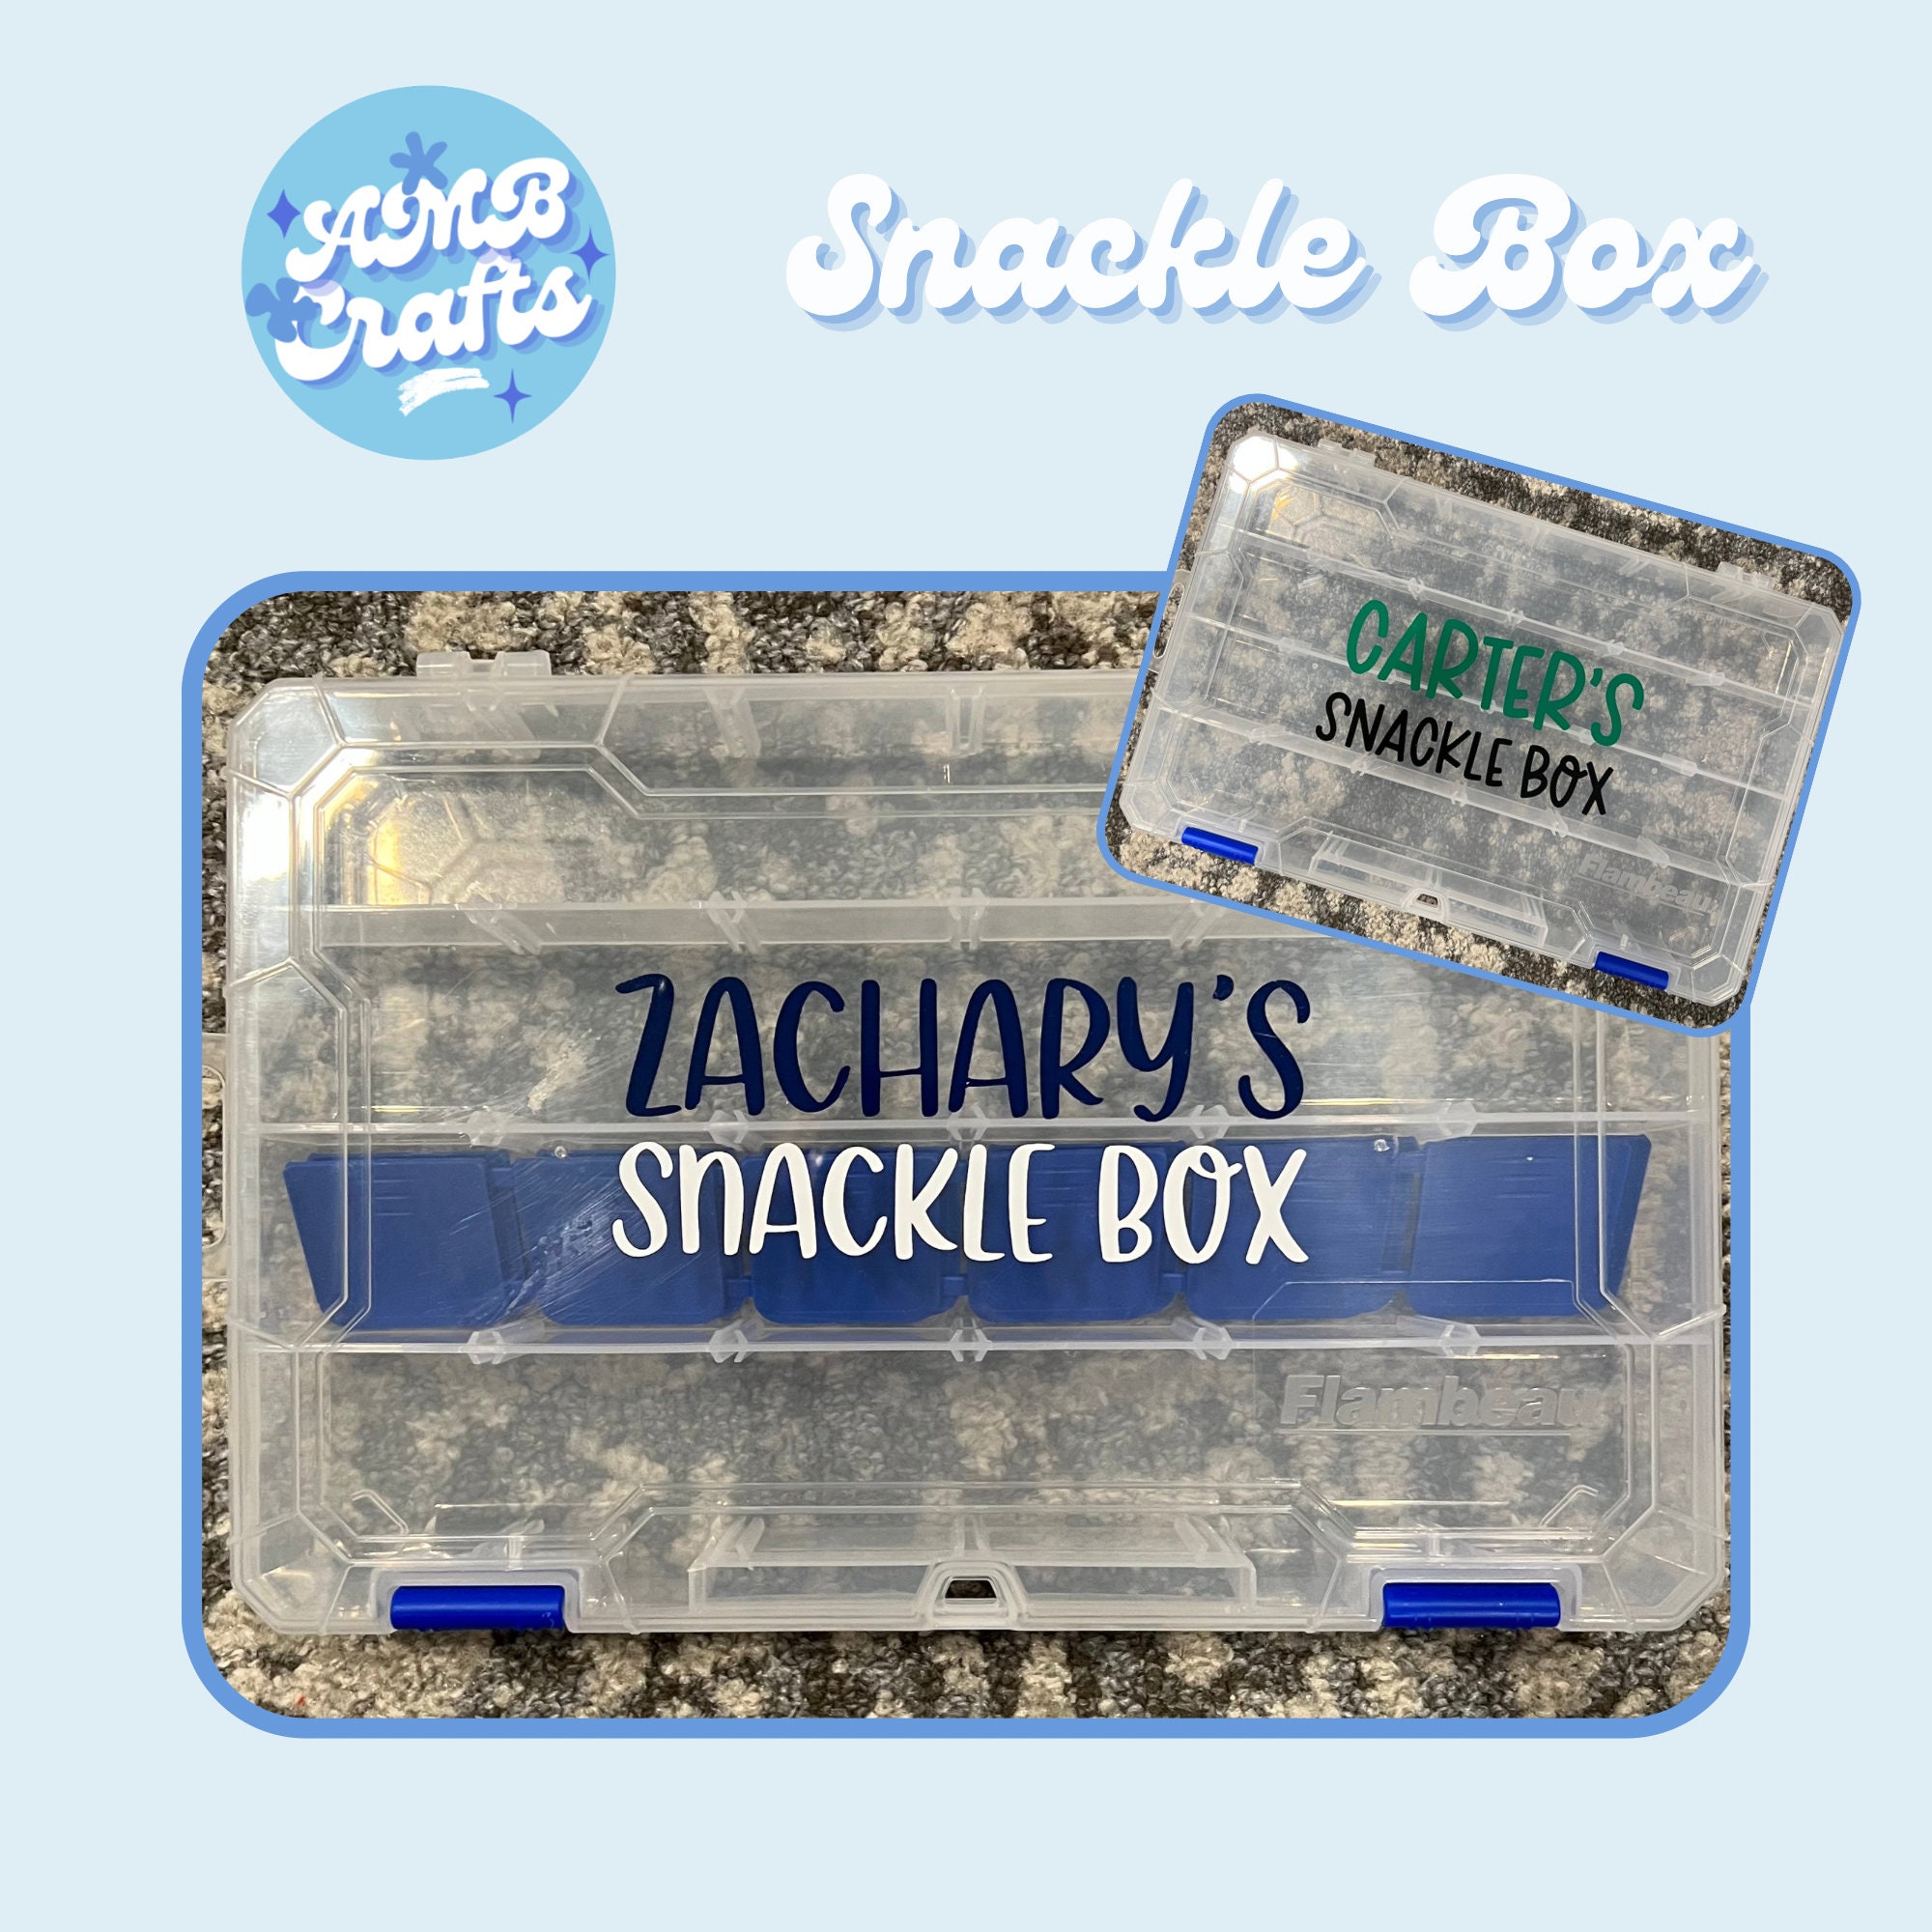 Personalized Snackle Box BPA Free, Charcutterie Box, Snack Box, Winey Box,  Boat Day Accessories, Sterilite Food Safe, Gifts, Christmas Gift 